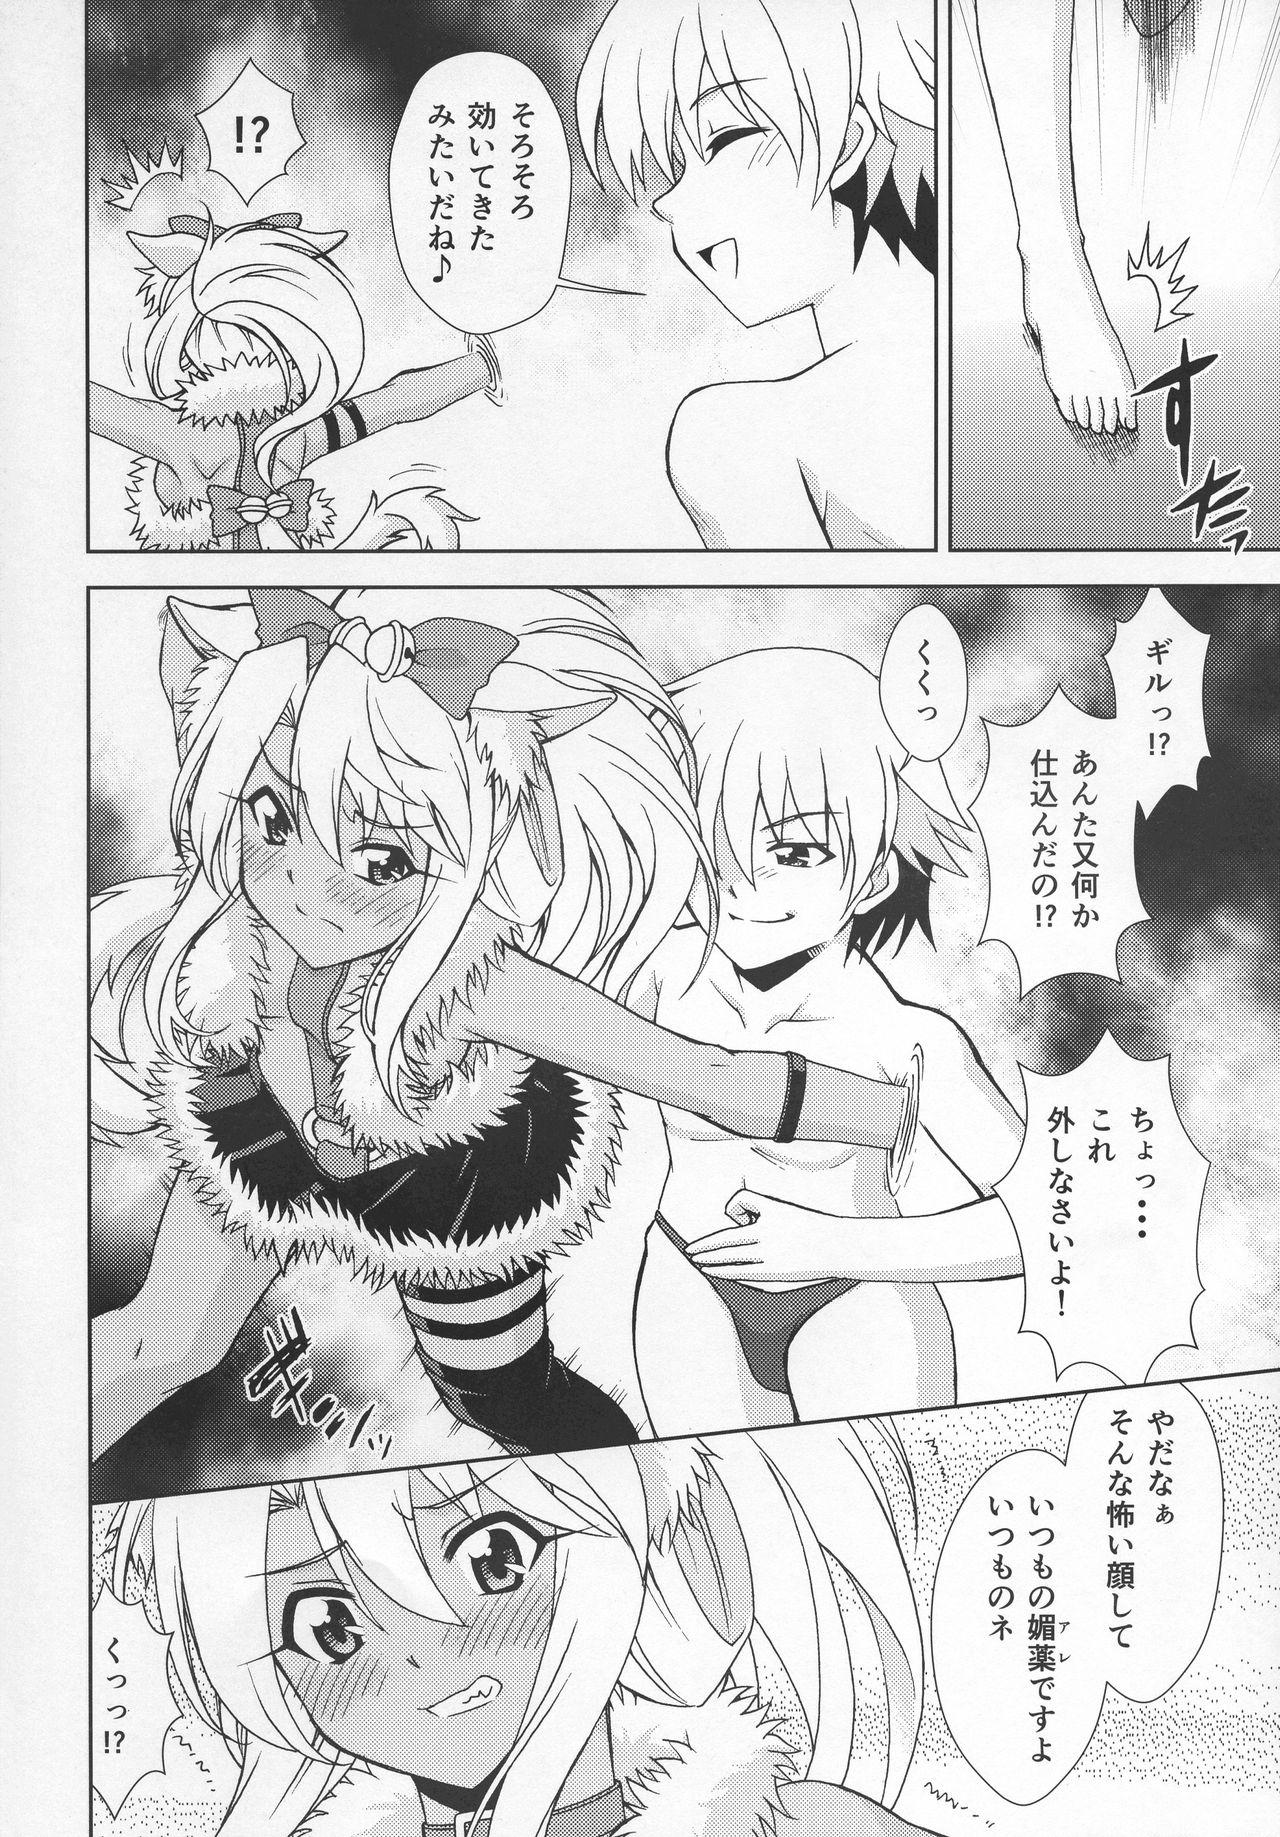 Old And Young PRISMA☆BEAST - Fate grand order Glamour Porn - Page 8